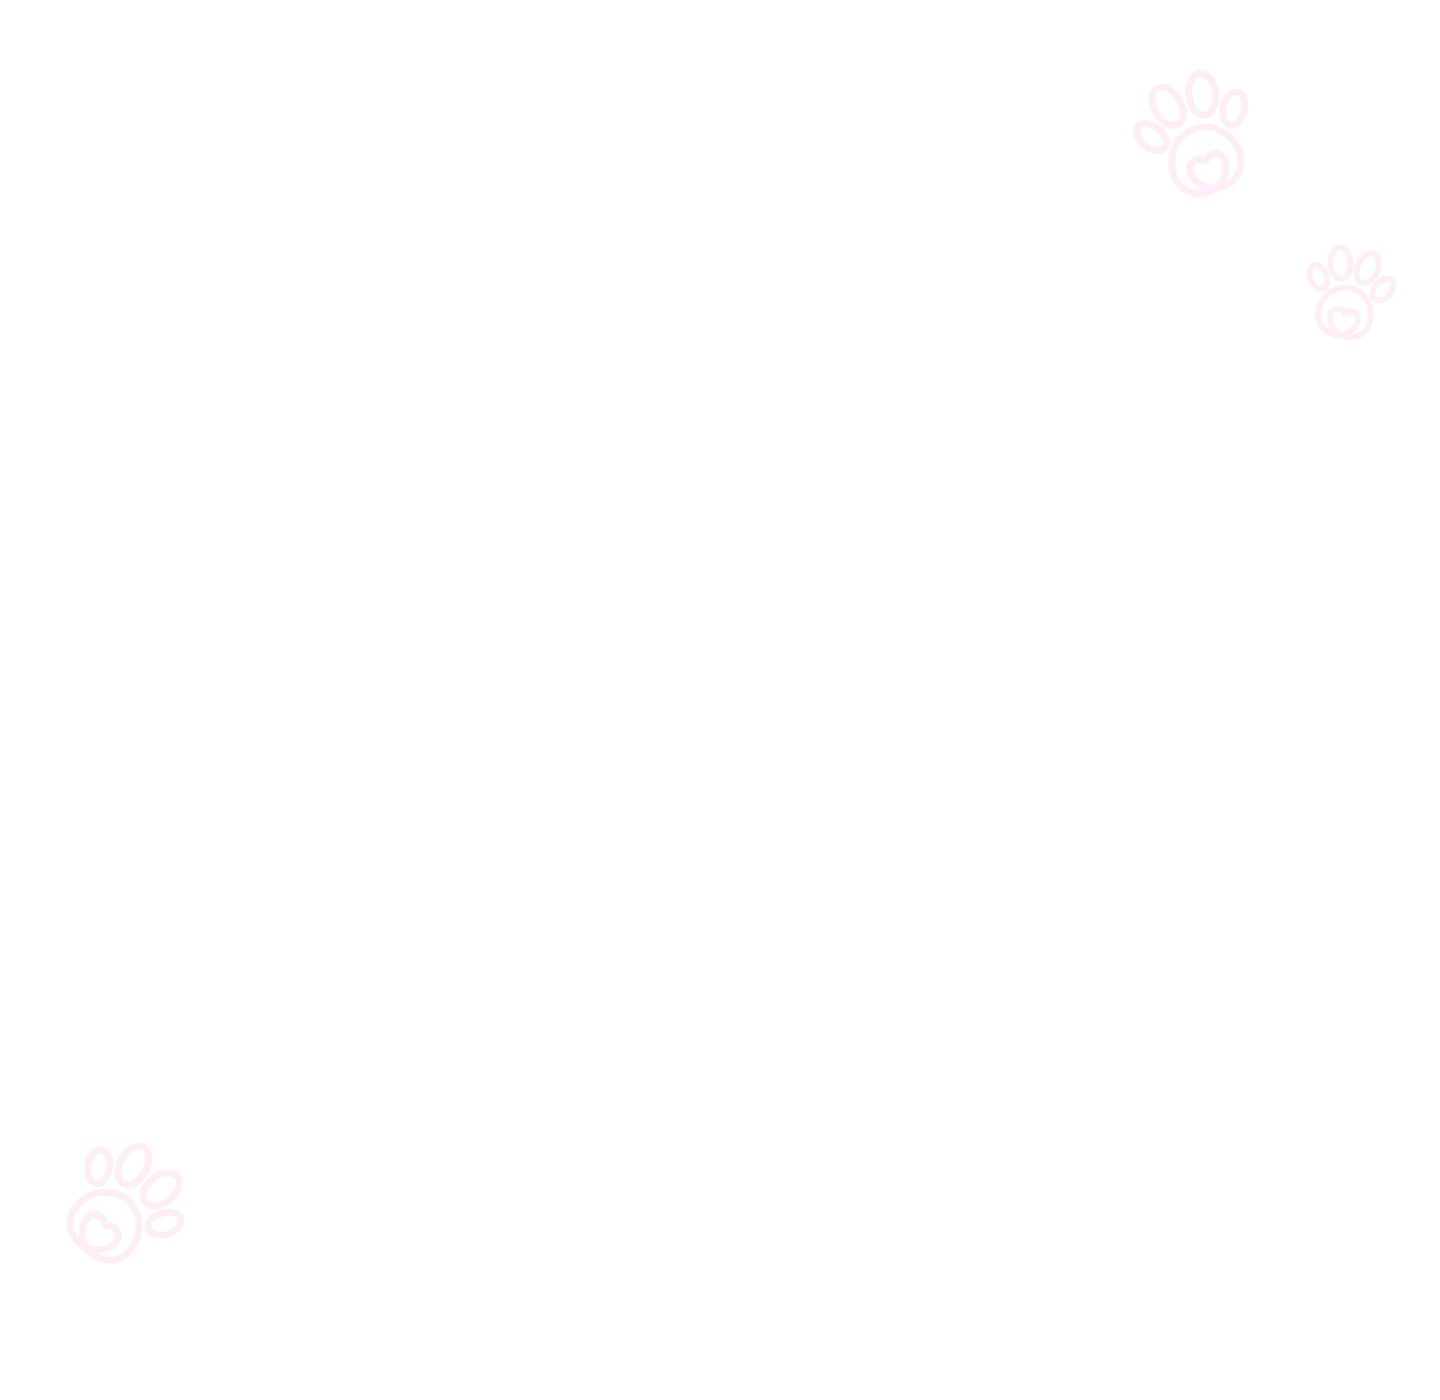 Transparent background with white paw print drawings.